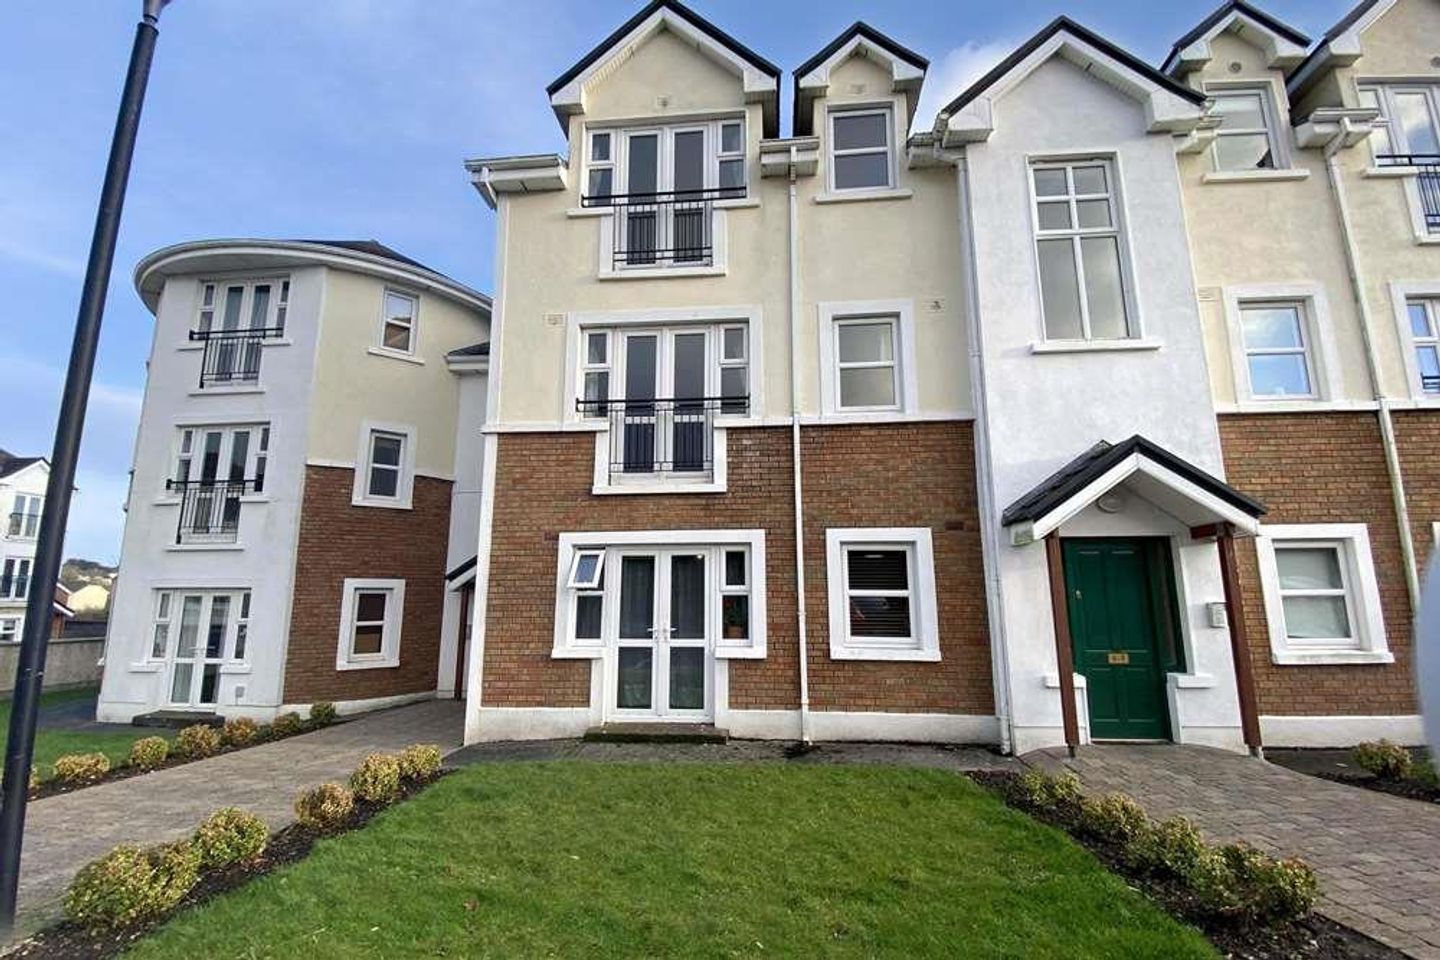 Apartment 4, Cluain Riocaird. Headford Road, Galway City, Galway City Centre